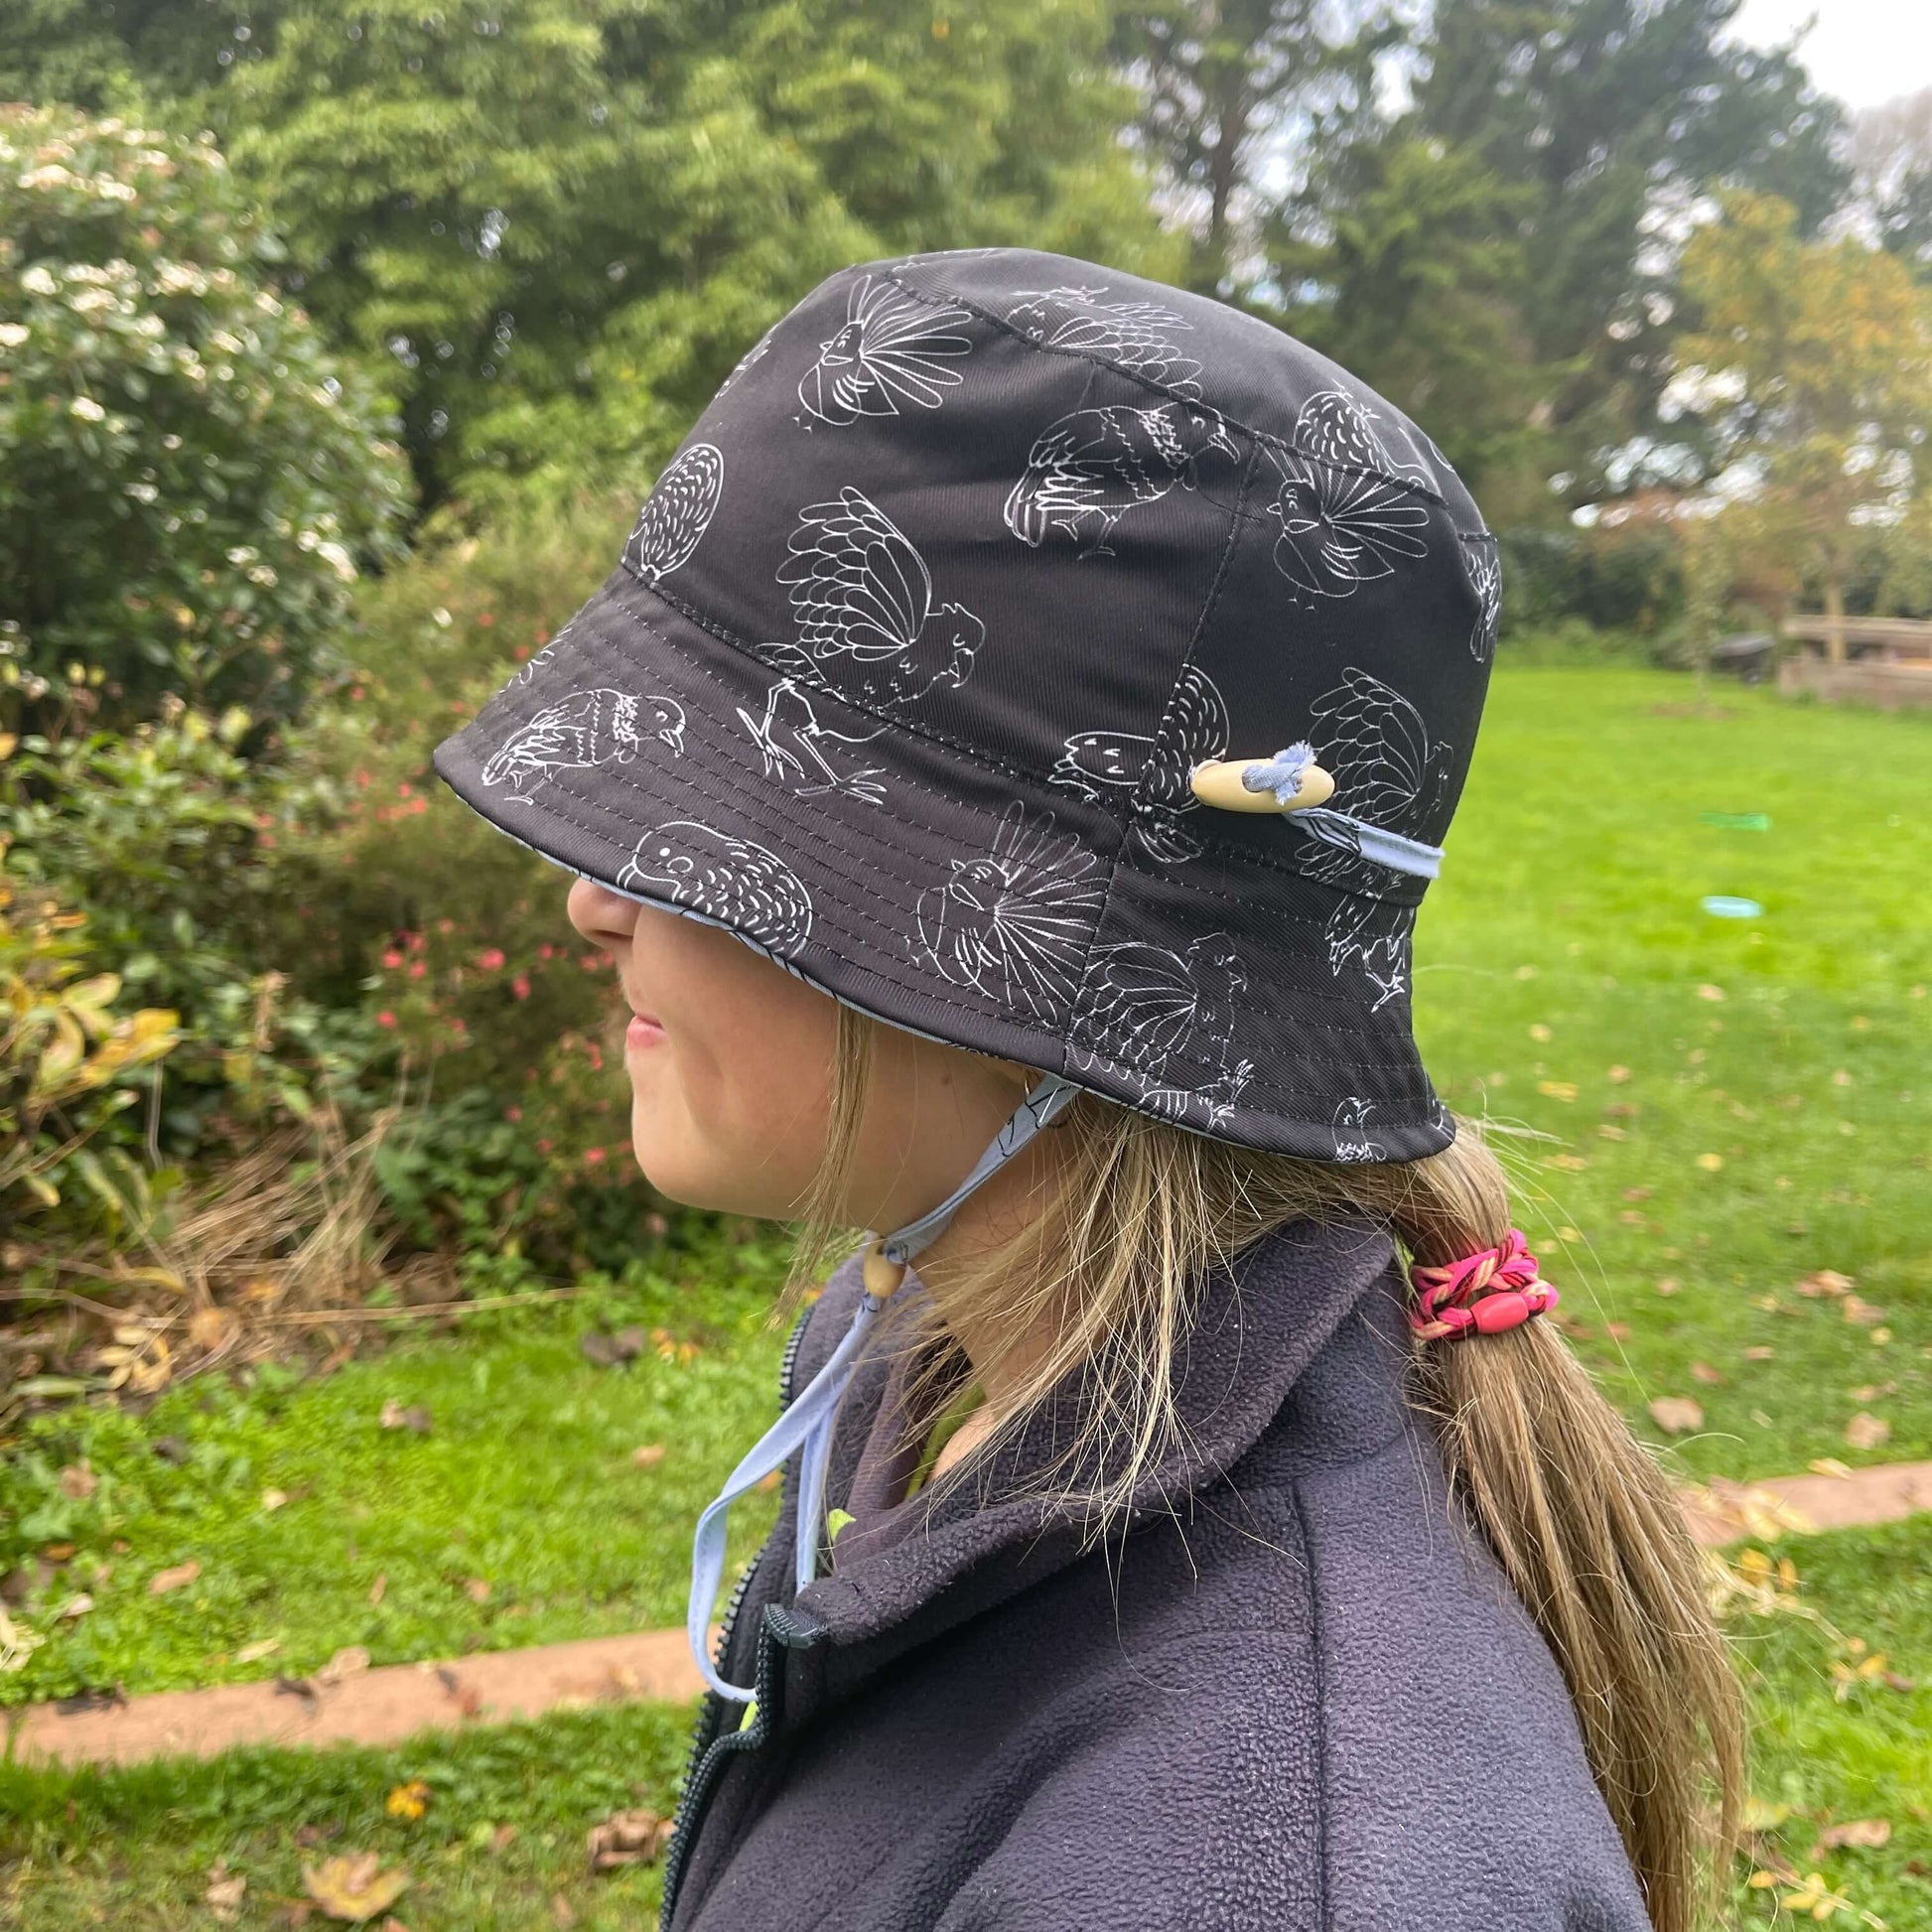 Girl wearing a black bucket hat with white outlines of NZ birds.